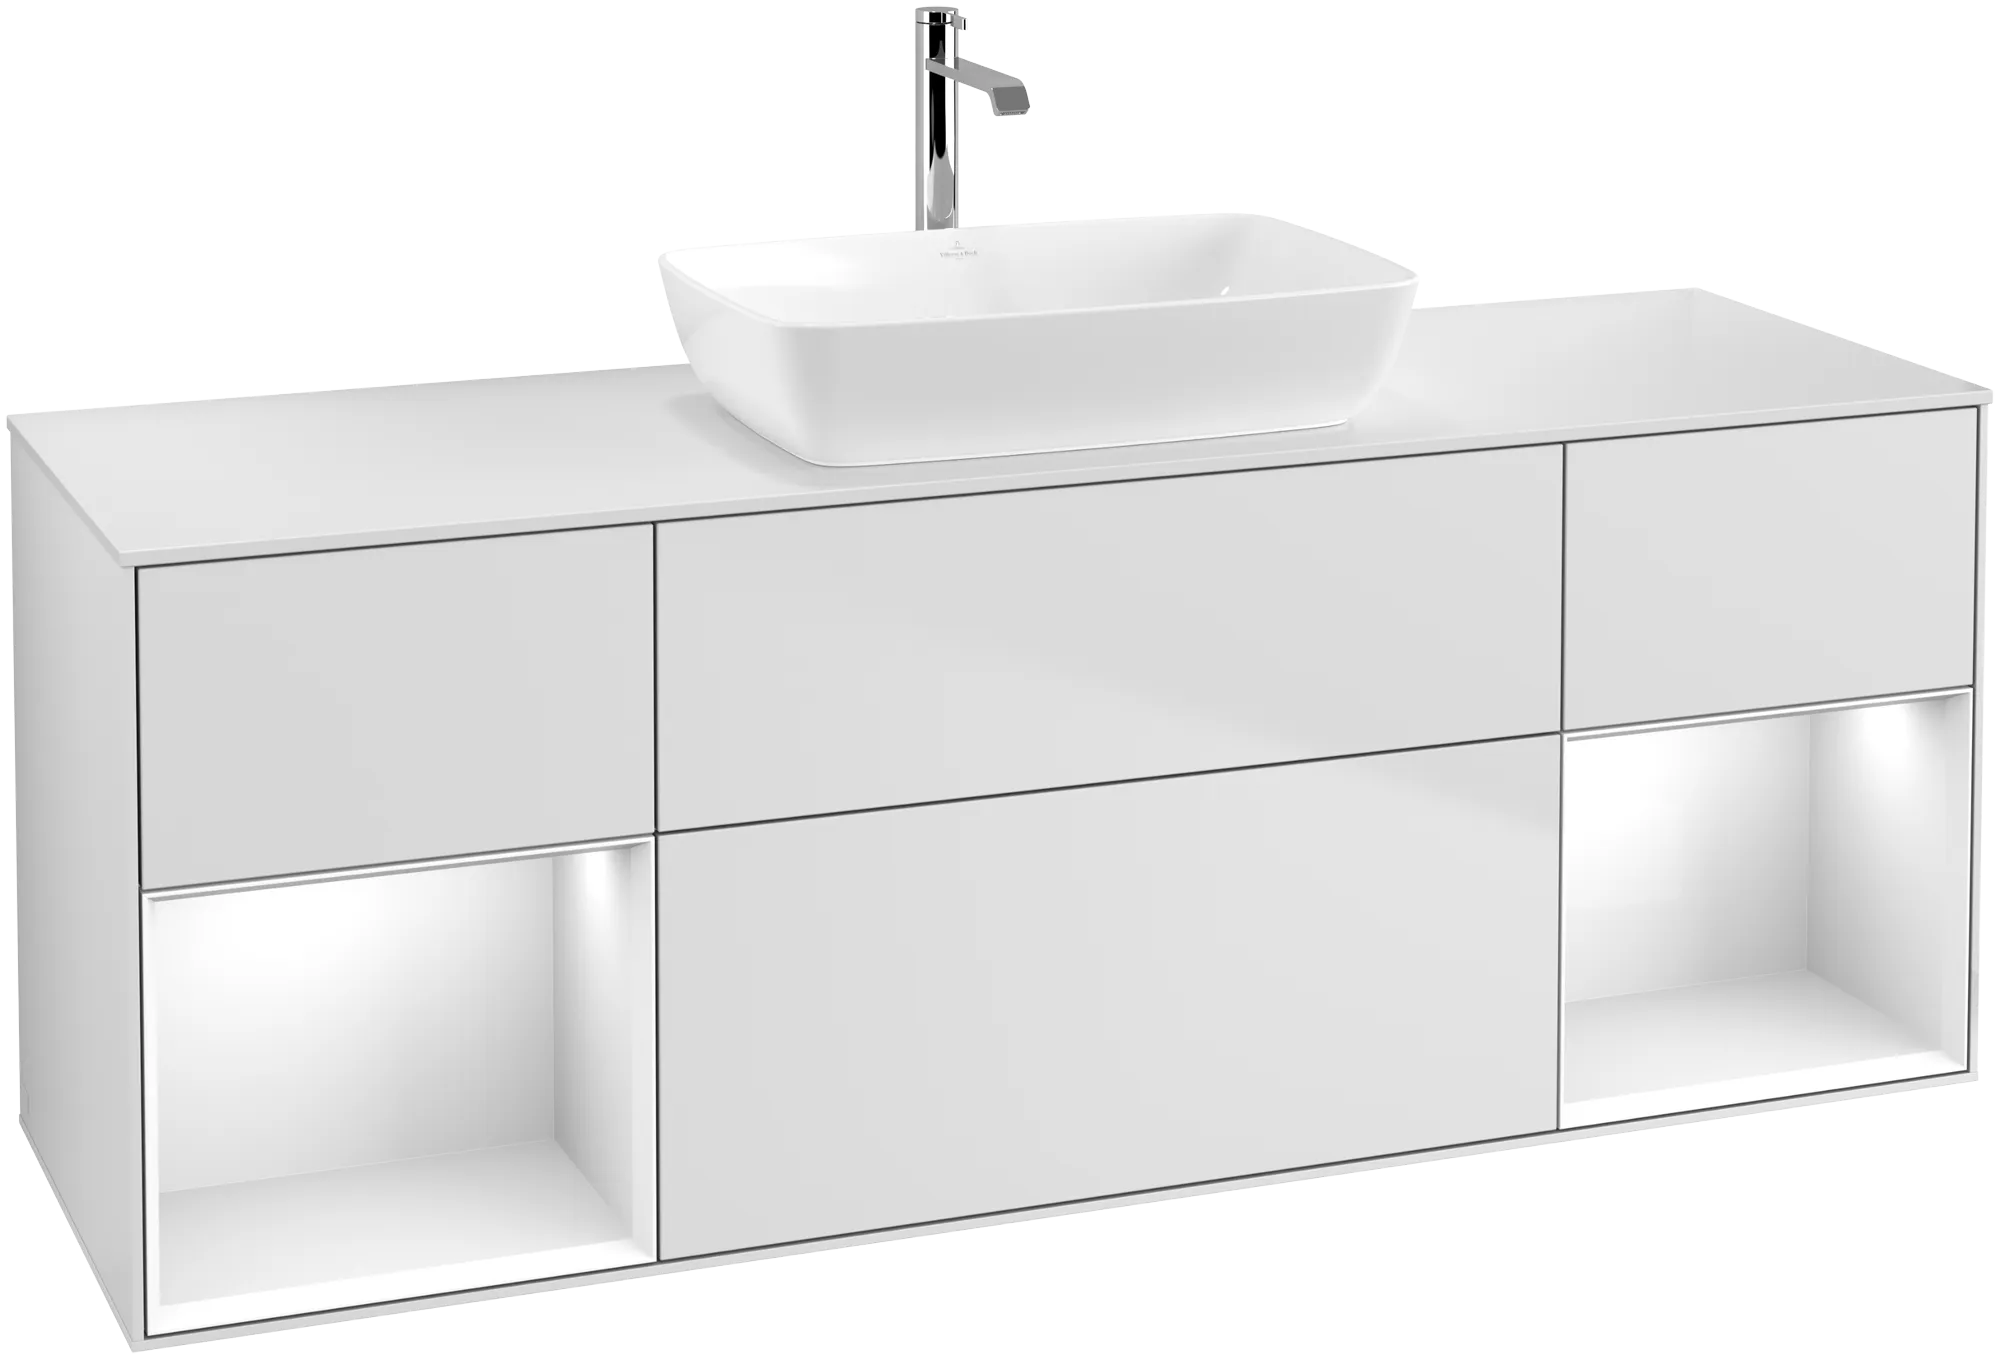 Зображення з  VILLEROY BOCH Finion Vanity unit, with lighting, 4 pull-out compartments, 1600 x 603 x 501 mm, White Matt Lacquer / Glossy White Lacquer / Glass White Matt #G861GFMT